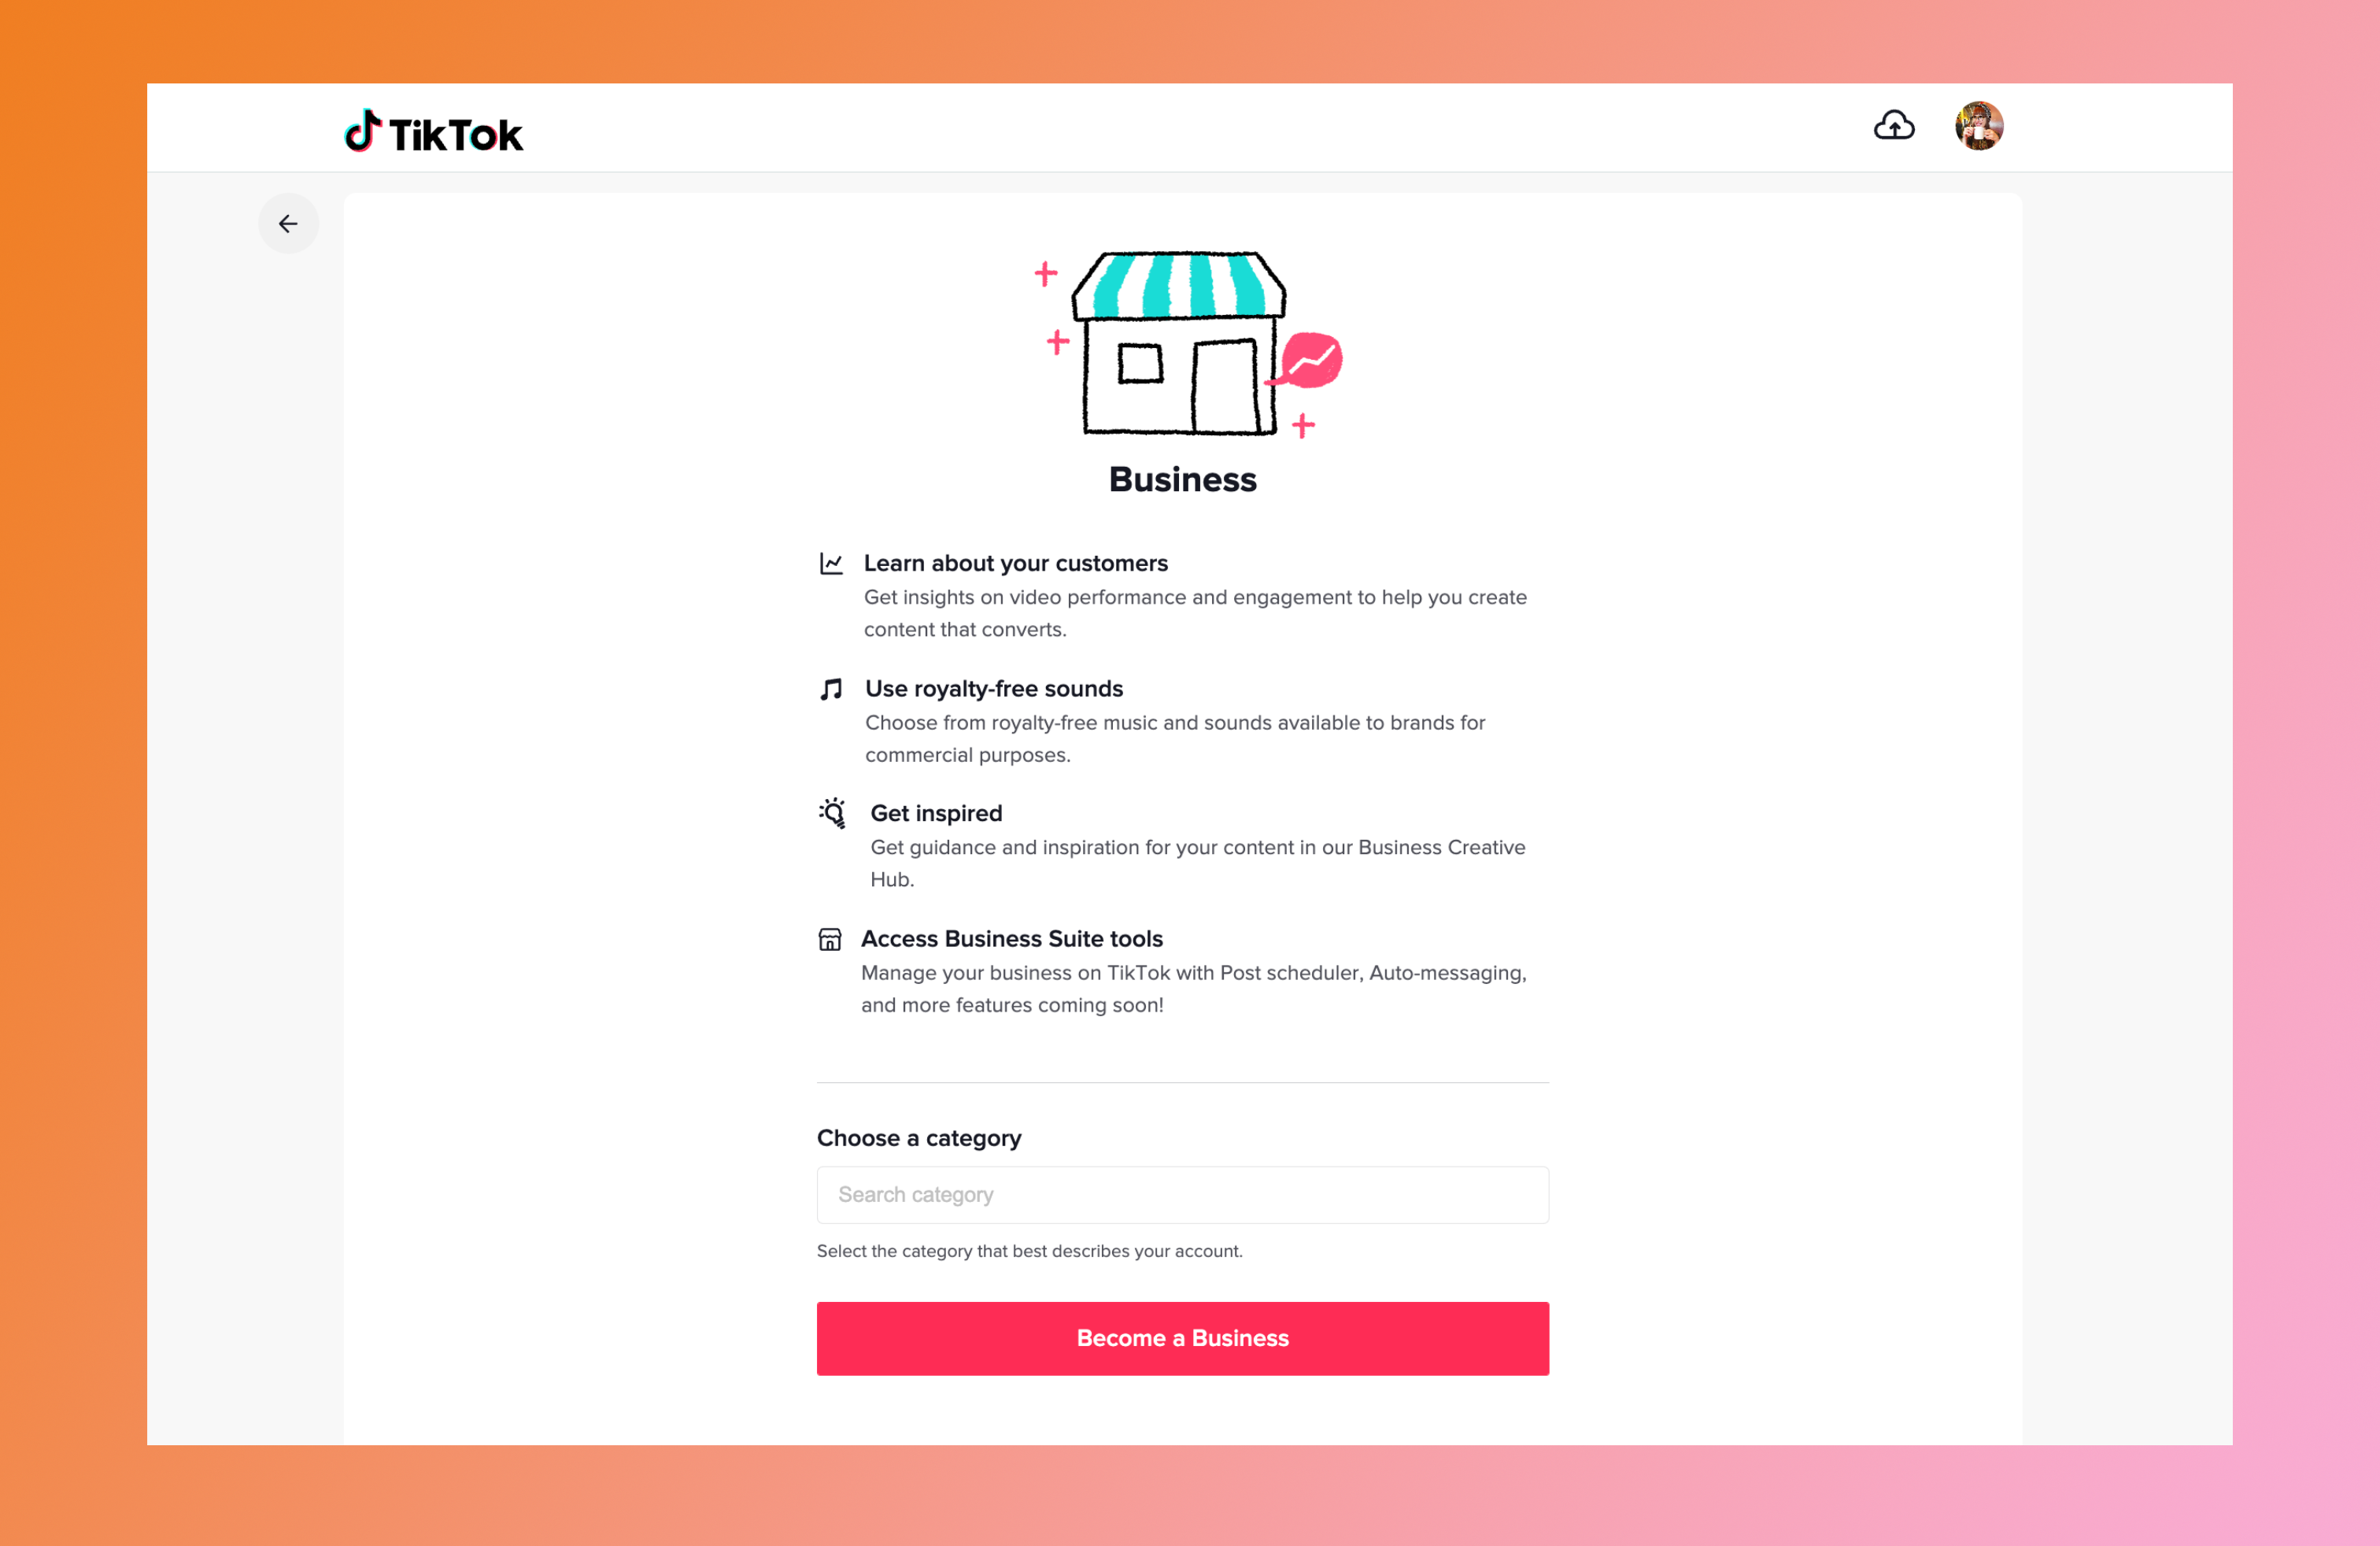 TikTok settings page showing the sign up flow for a TikTok Business Account